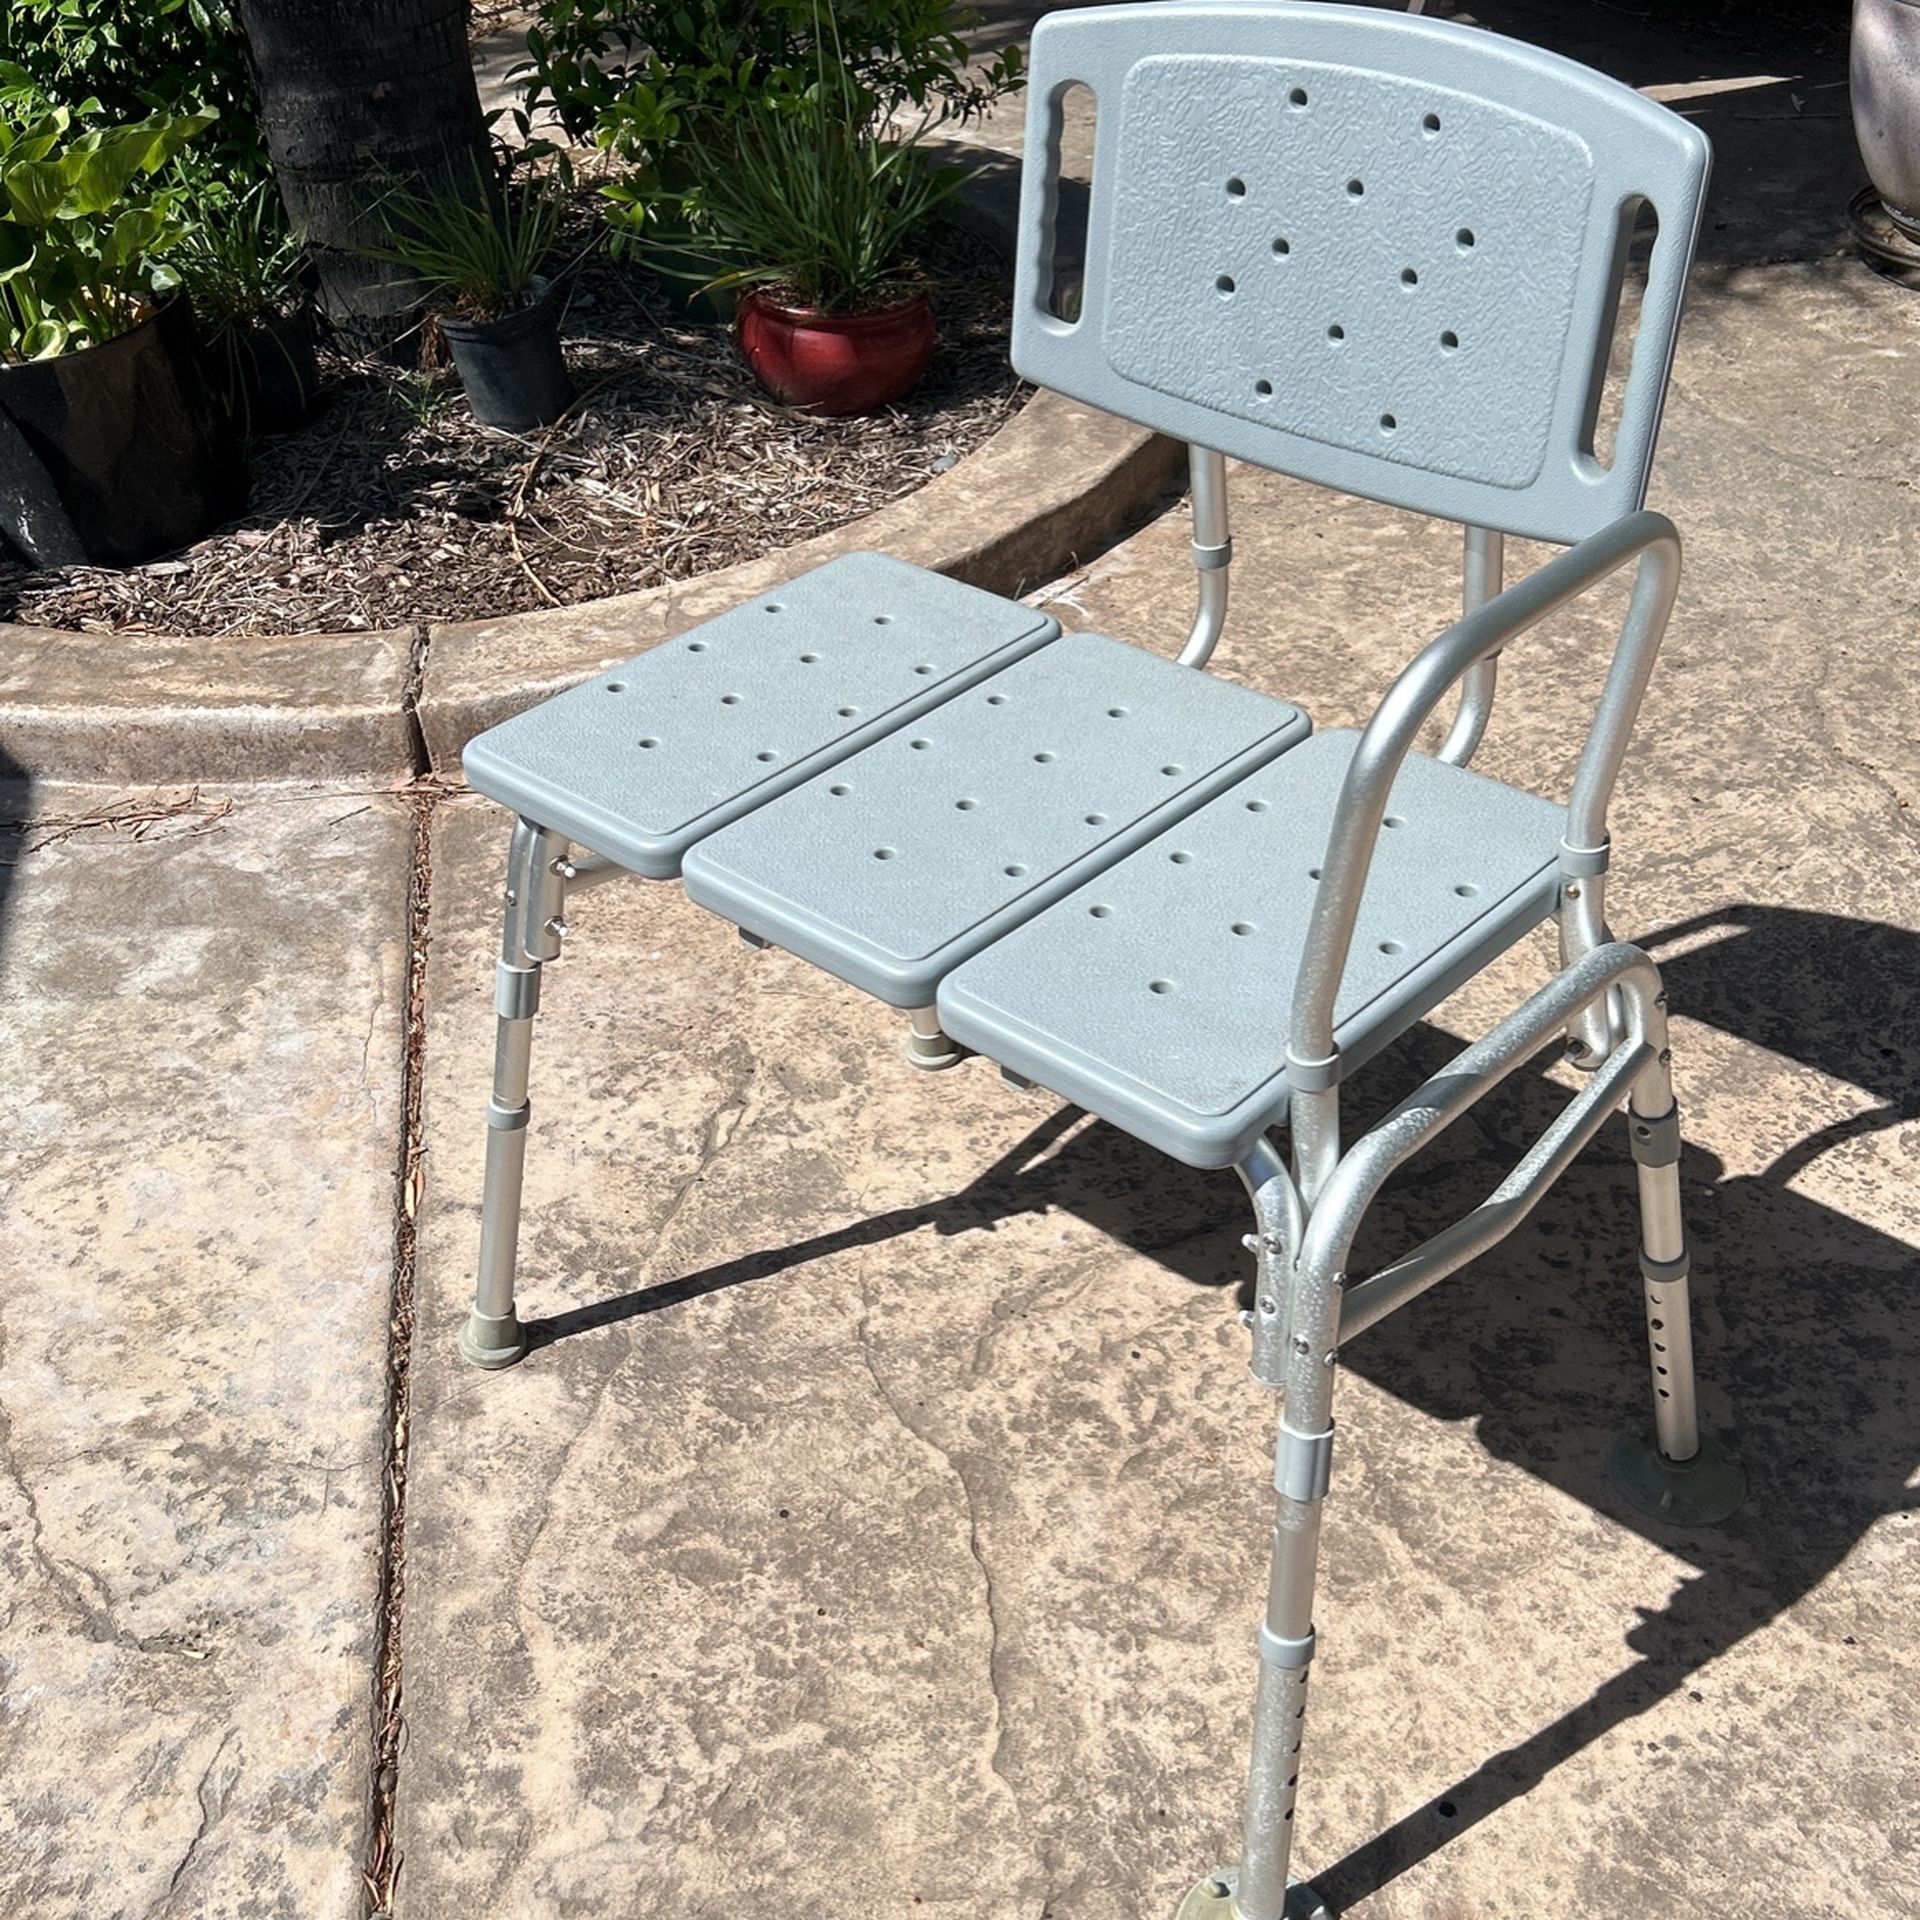 Shower Chair Disability Elderly durable 600 Pound Capacity